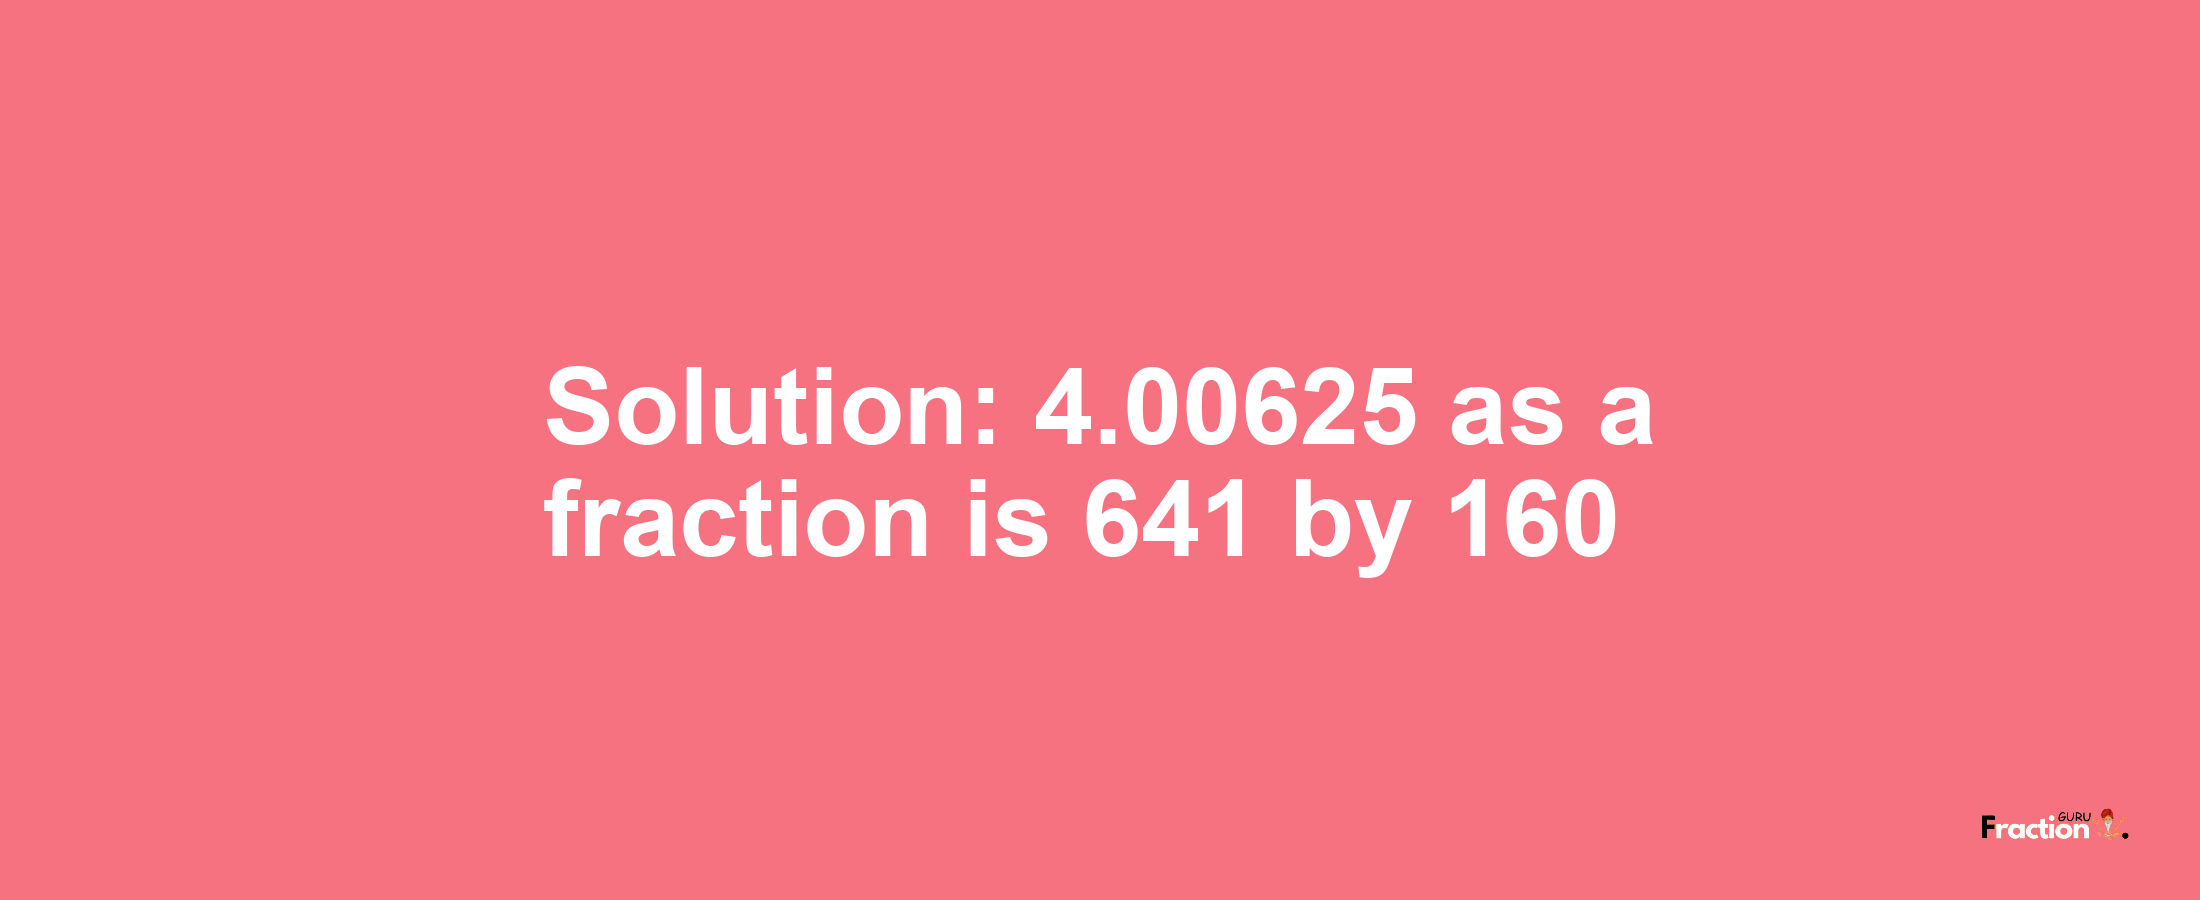 Solution:4.00625 as a fraction is 641/160